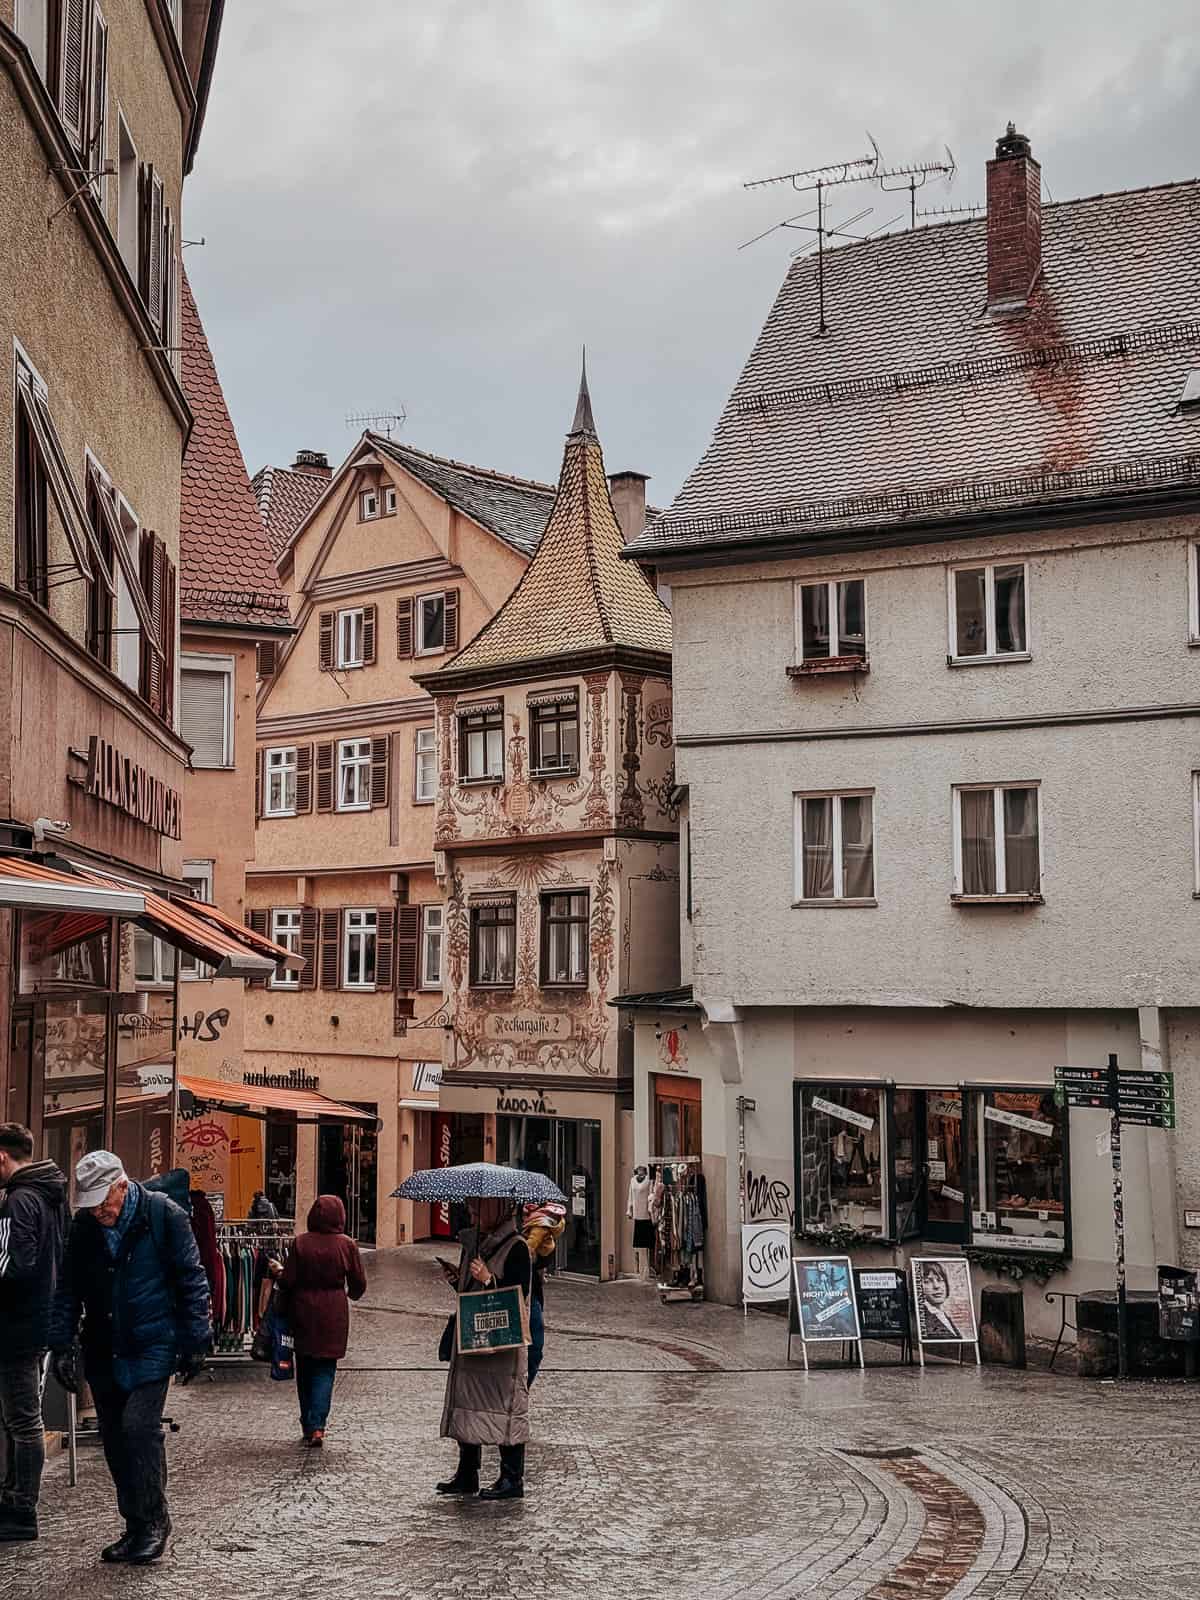 A cobblestone street in Tübingen, lined with people walking and beautifully detailed buildings, including one with ornate frescoed facades.